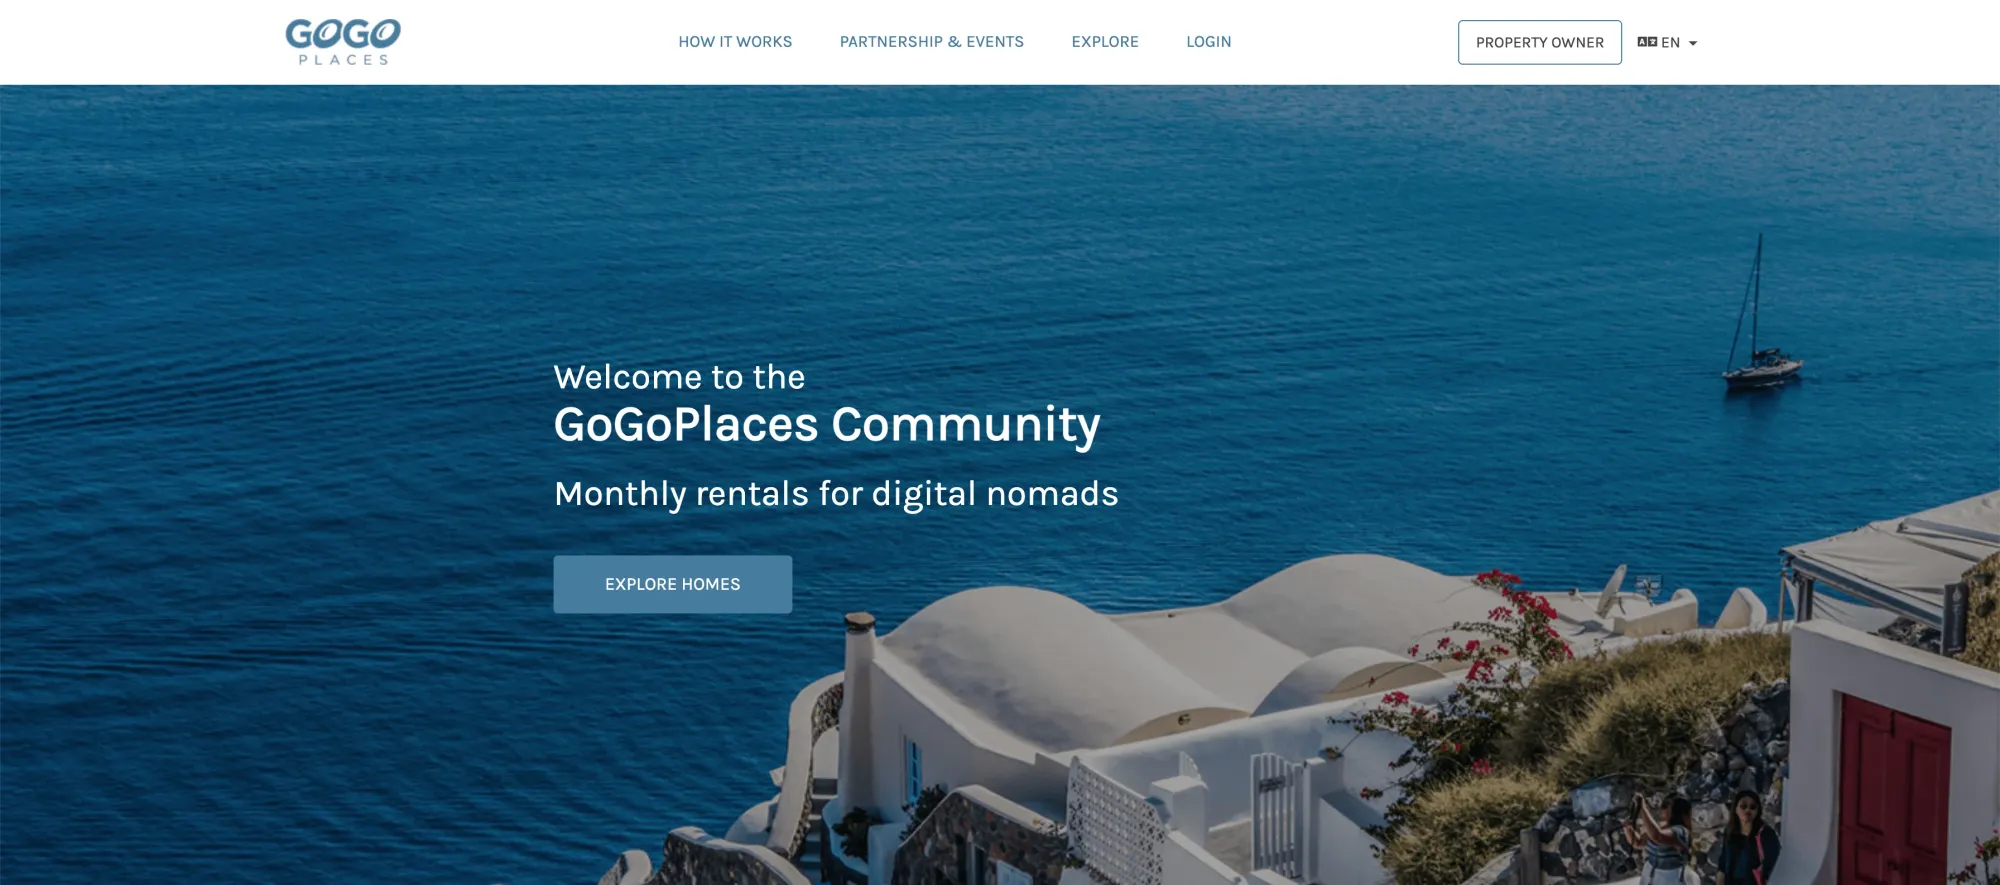 gogoplaces, a rental site for digital nomads